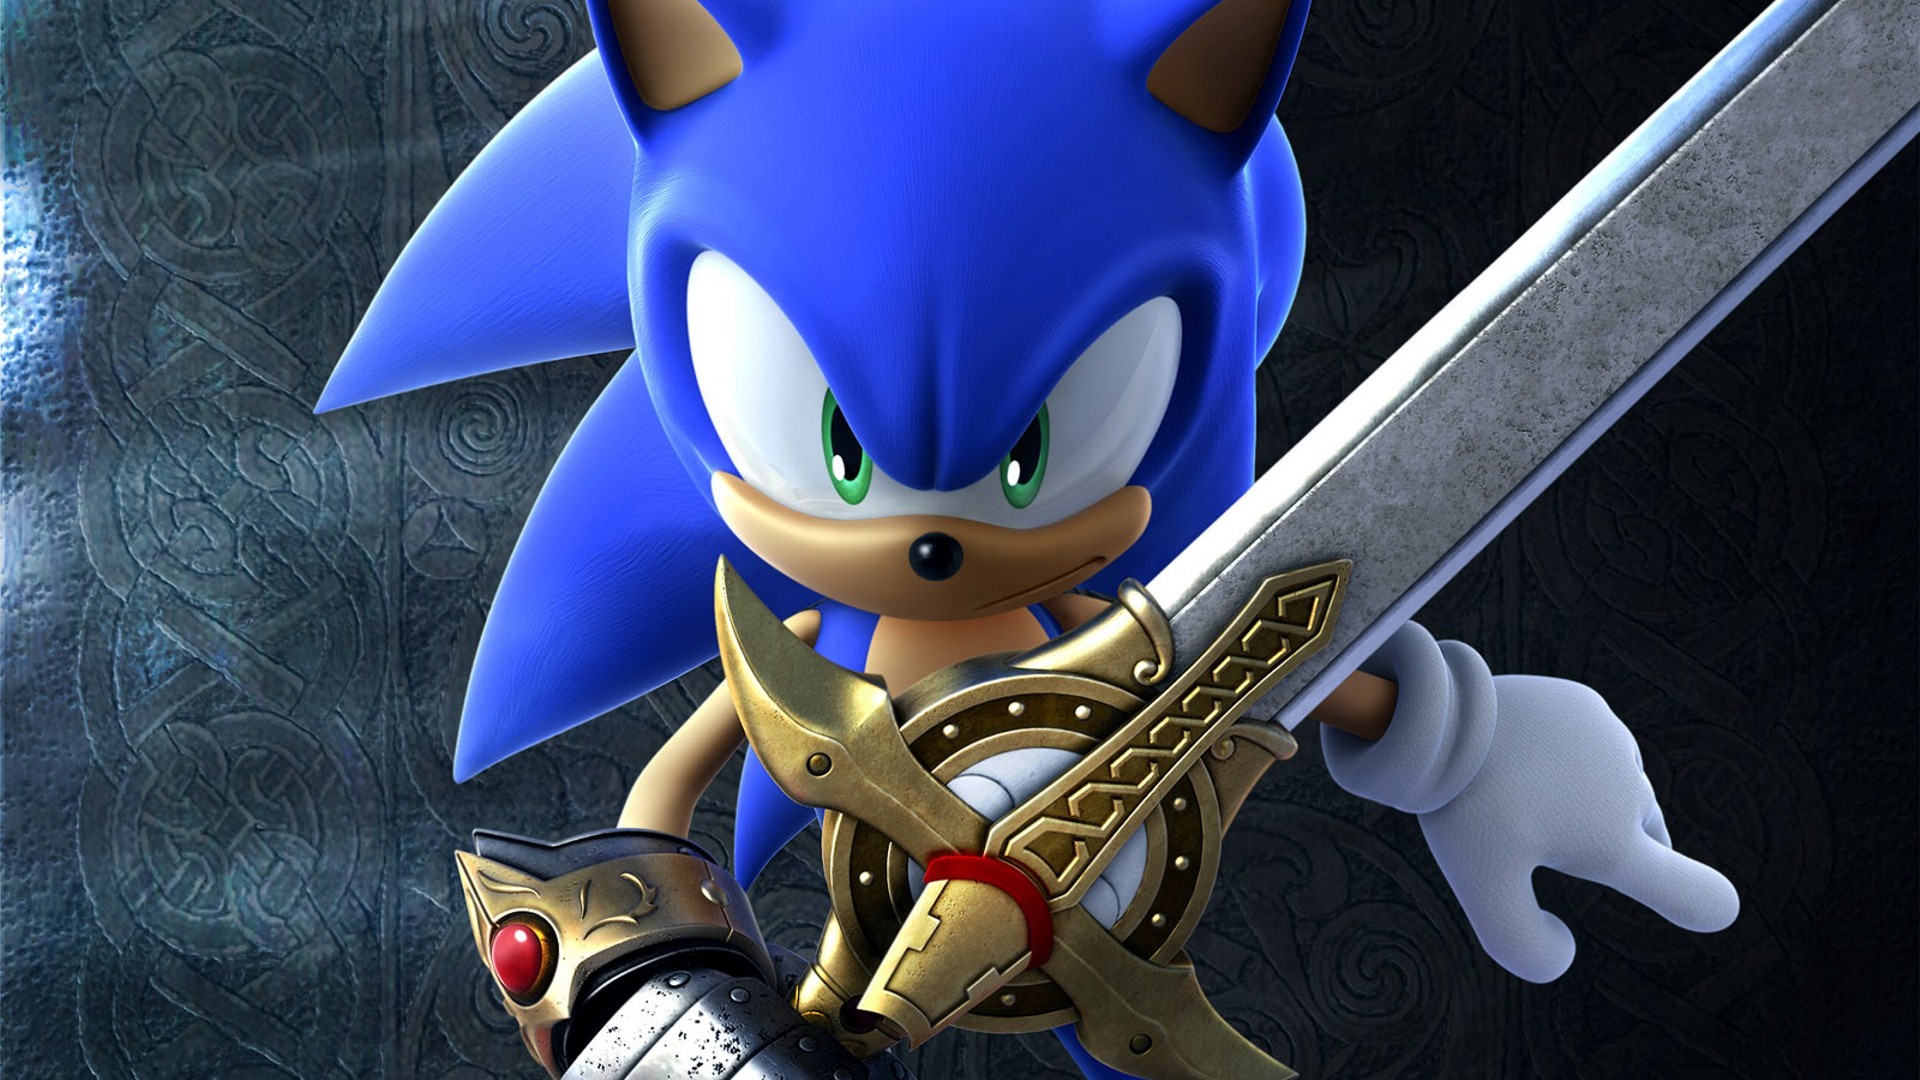 Sonic HD wallpapers #12 - 1920x1080